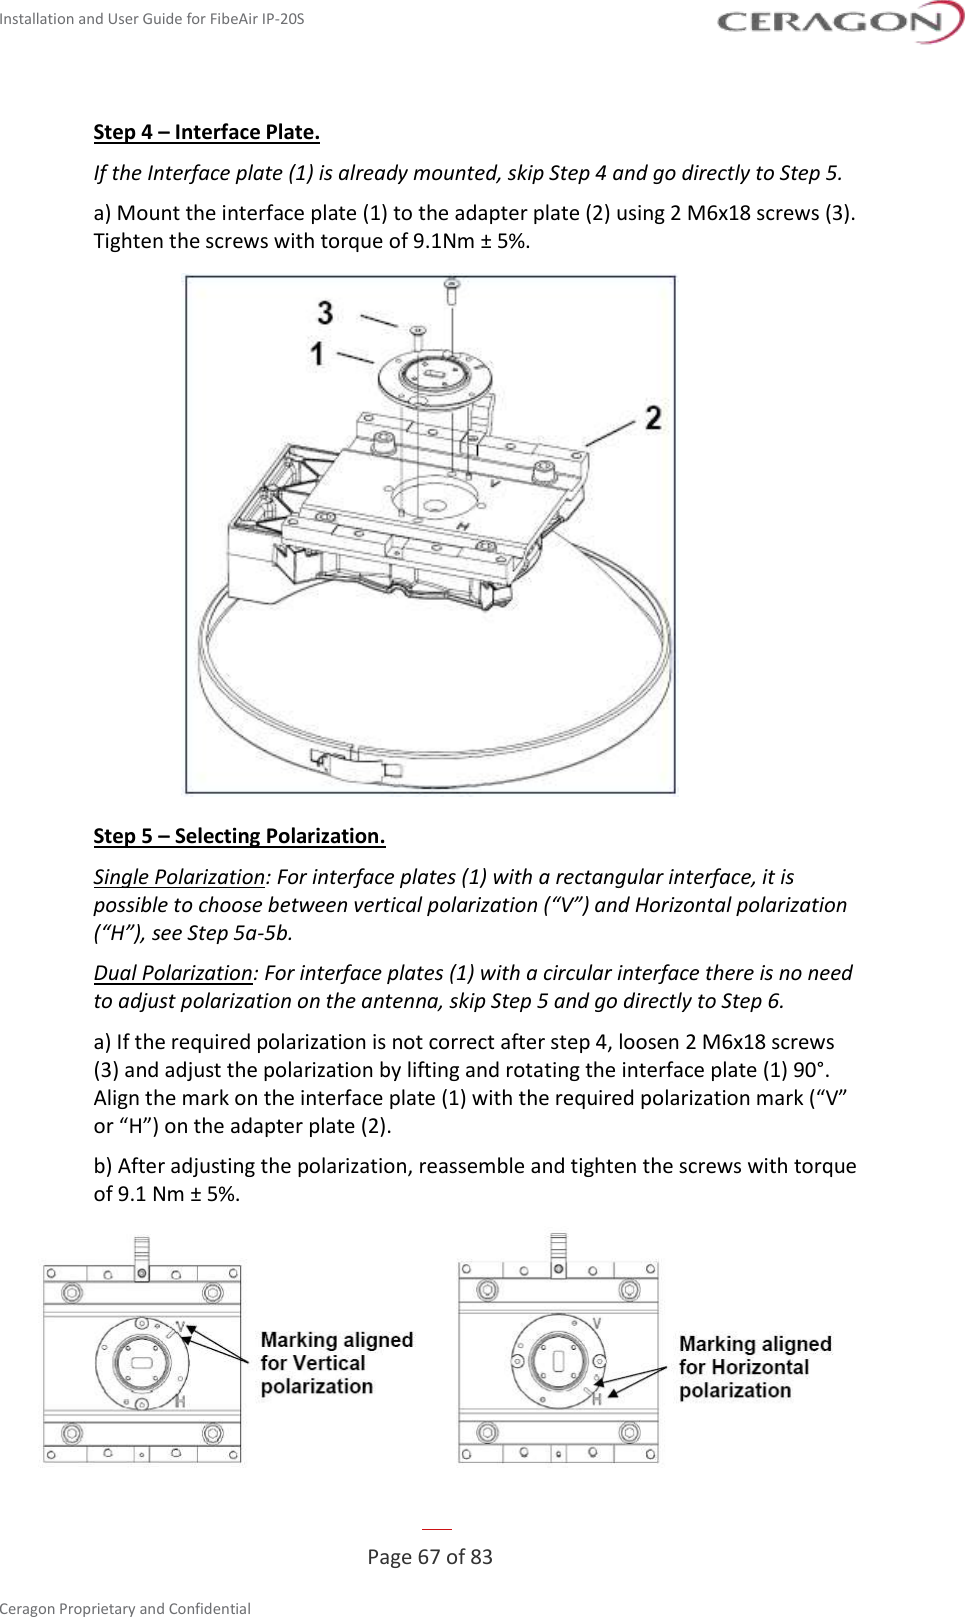 Installation and User Guide for FibeAir IP-20S   Page 67 of 83  Ceragon Proprietary and Confidential     Step 4 – Interface Plate. If the Interface plate (1) is already mounted, skip Step 4 and go directly to Step 5. a) Mount the interface plate (1) to the adapter plate (2) using 2 M6x18 screws (3). Tighten the screws with torque of 9.1Nm ± 5%.  Step 5 – Selecting Polarization. Single Polarization: For interface plates (1) with a rectangular interface, it is possible to choose between vertical polarization (“V”) and Horizontal polarization (“H”), see Step 5a-5b. Dual Polarization: For interface plates (1) with a circular interface there is no need to adjust polarization on the antenna, skip Step 5 and go directly to Step 6. a) If the required polarization is not correct after step 4, loosen 2 M6x18 screws (3) and adjust the polarization by lifting and rotating the interface plate (1) 90°. Align the mark on the interface plate (1) with the required polarization mark (“V” or “H”) on the adapter plate (2). b) After adjusting the polarization, reassemble and tighten the screws with torque of 9.1 Nm ± 5%.  